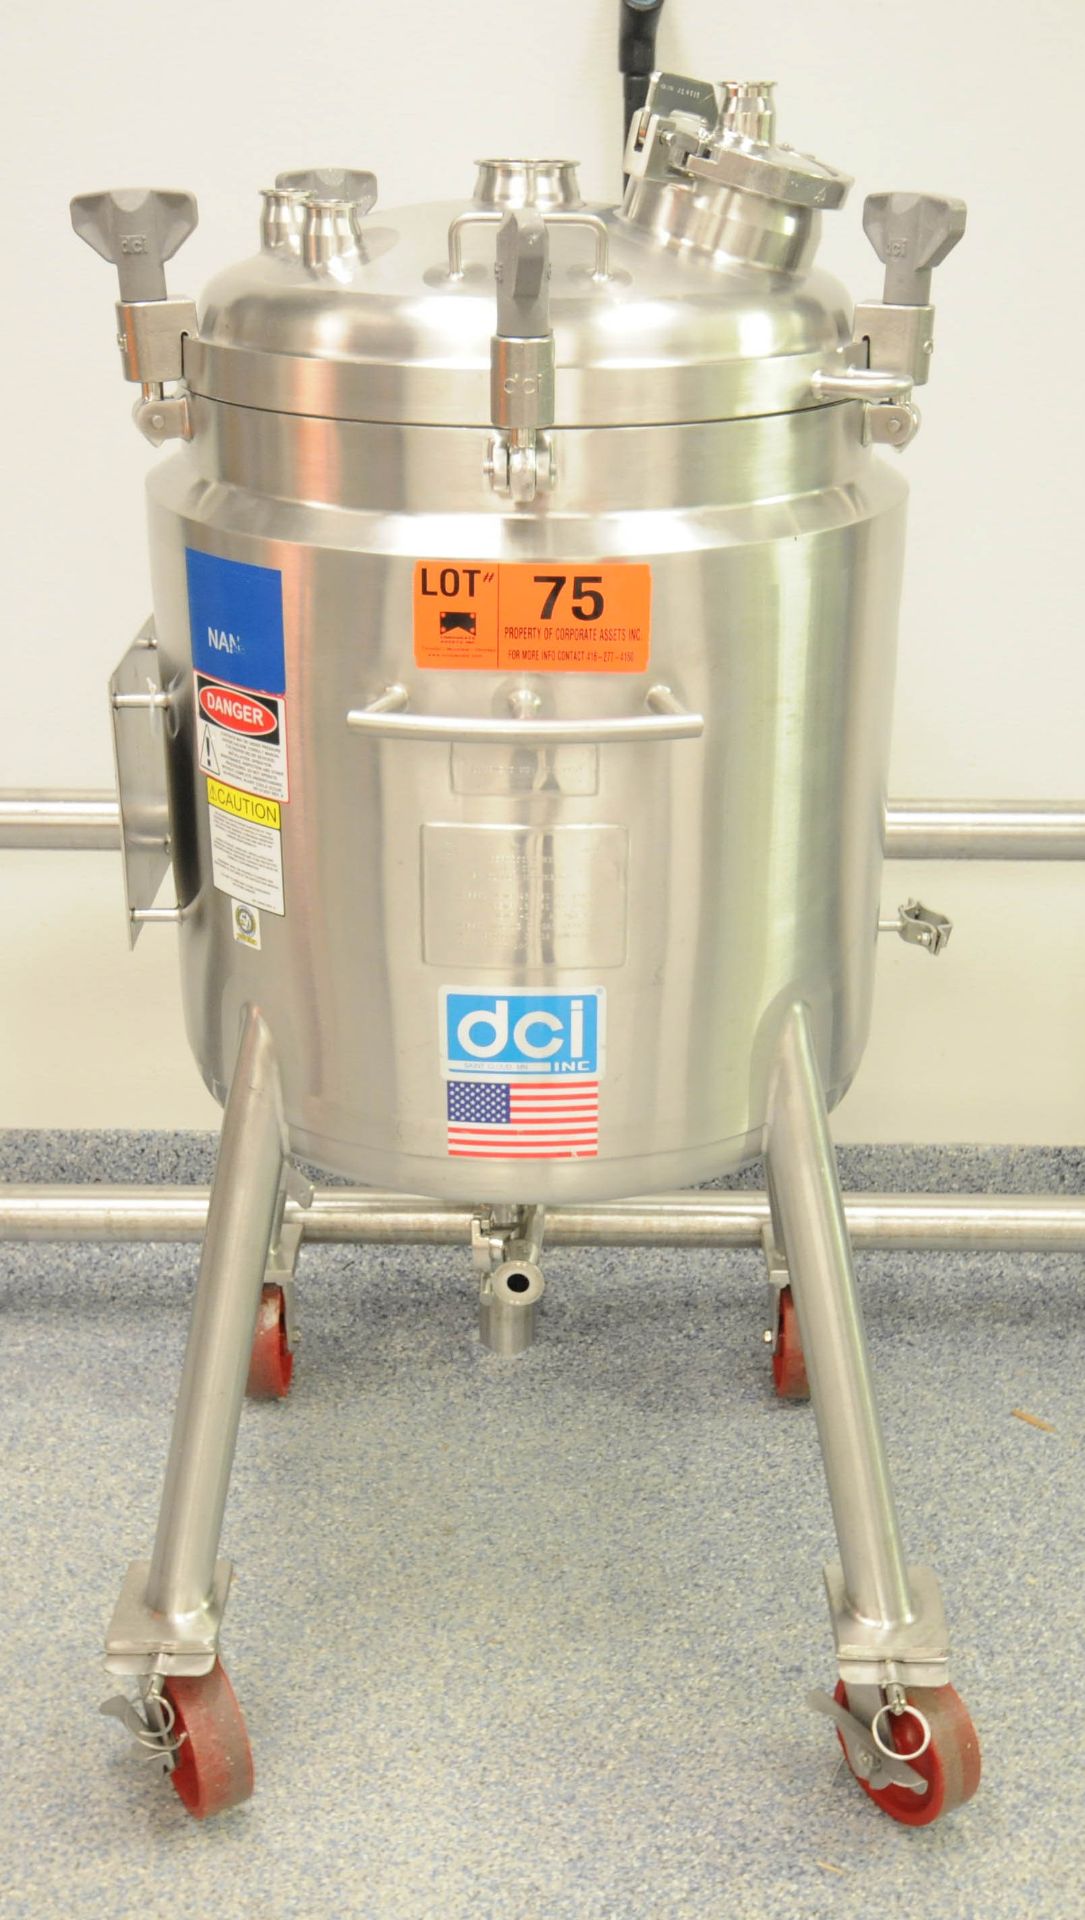 DCI (2009) PORTABLE STAINLESS STEEL TANK WITH 140 LITER CAPACITY, 45 PSIG MAWP @ 346 DEG F, 24"